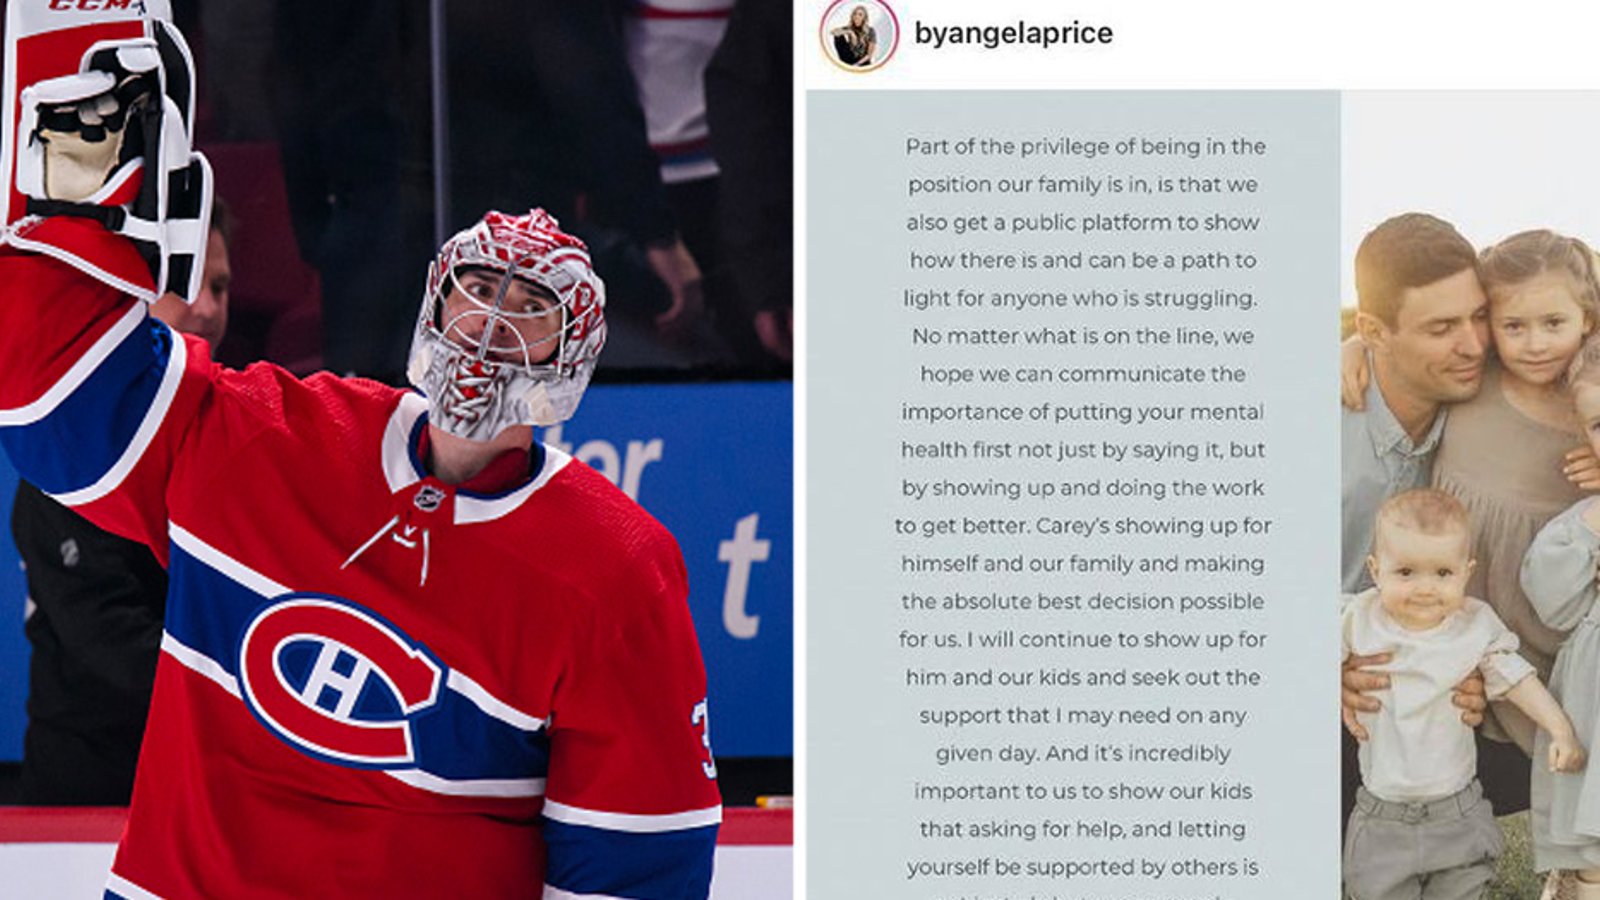 Angela Price shares details after husband Carey Price leaves the Montreal Canadiens